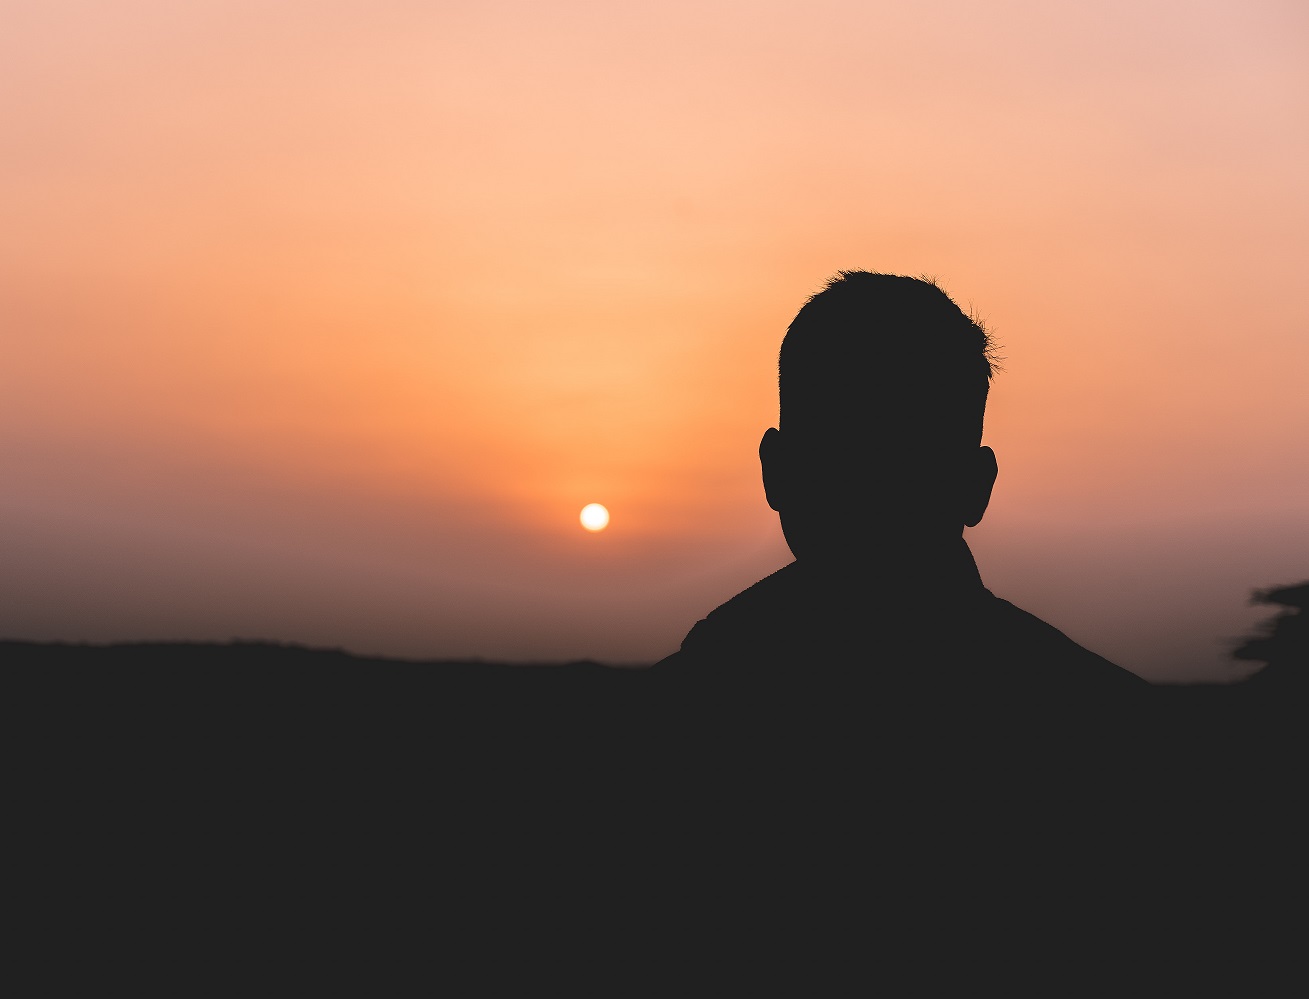 Man silhouette at sunset